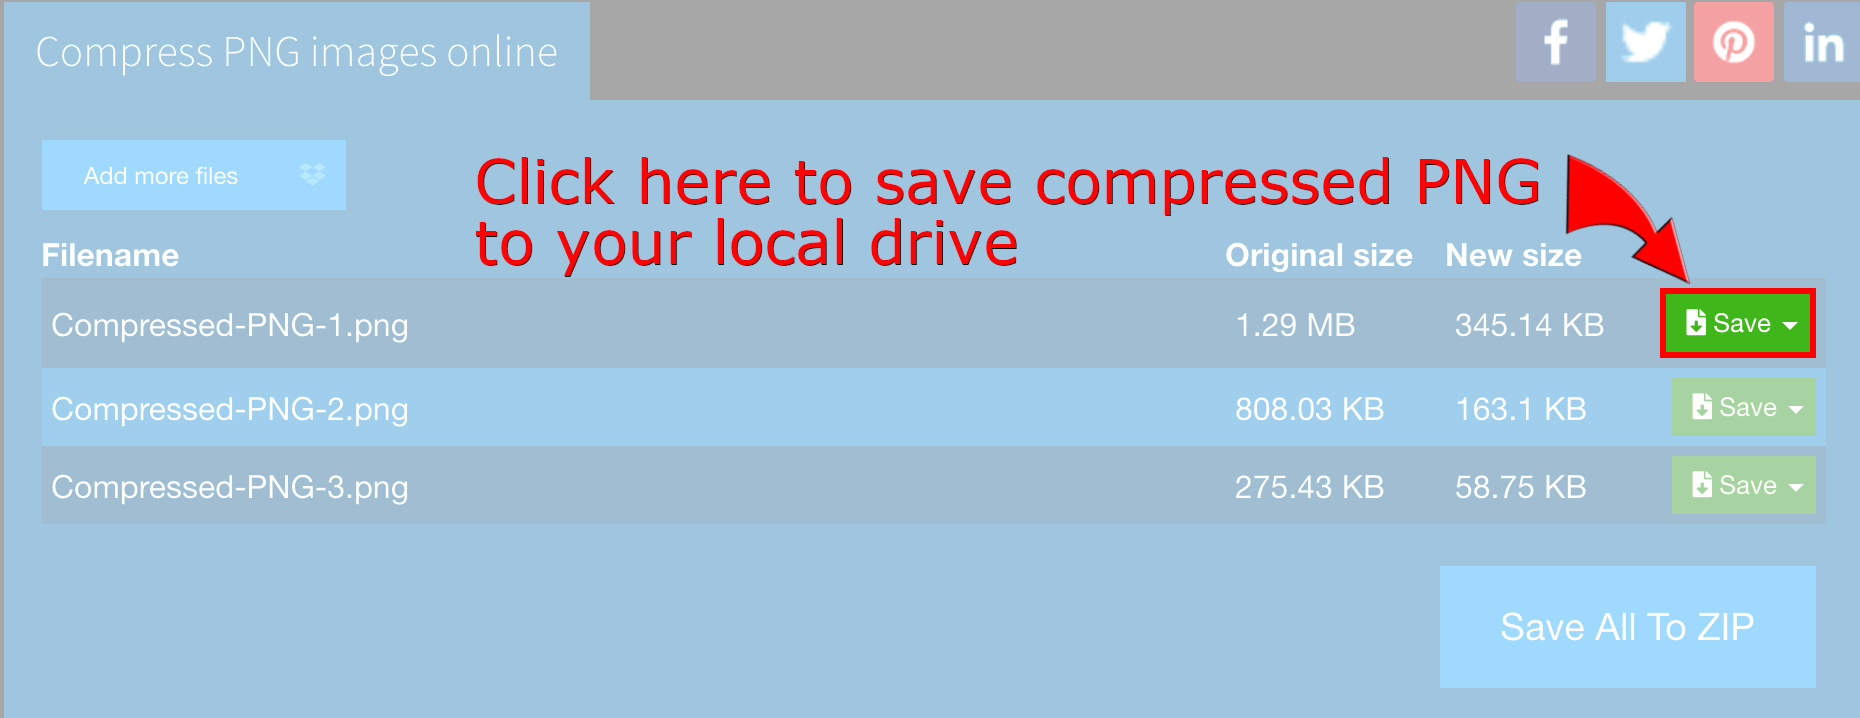 Click here to save individual compressed PNG images to your local drive